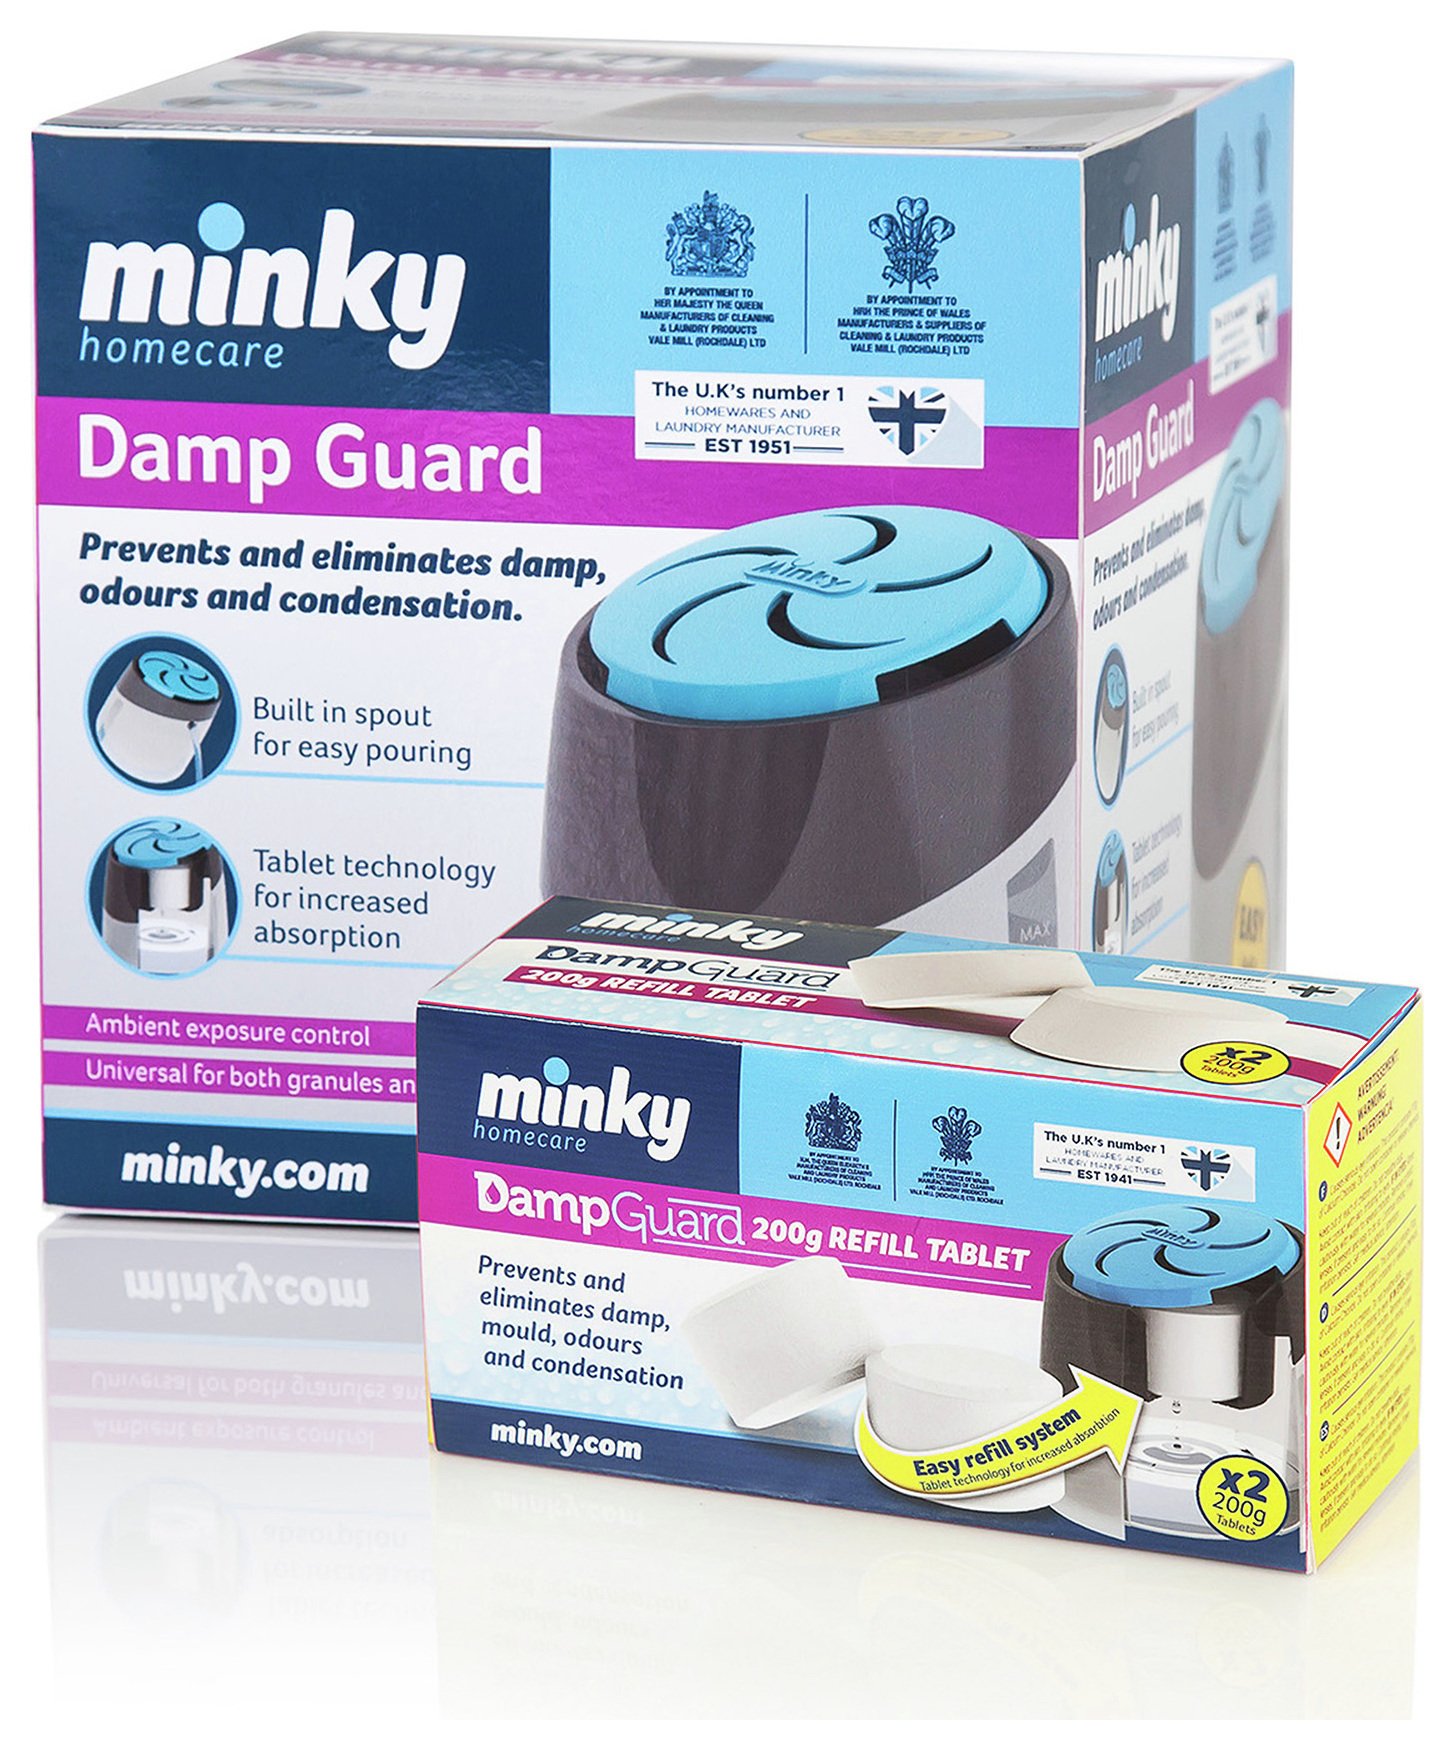 Minky Damp Guard with 4 Refills.